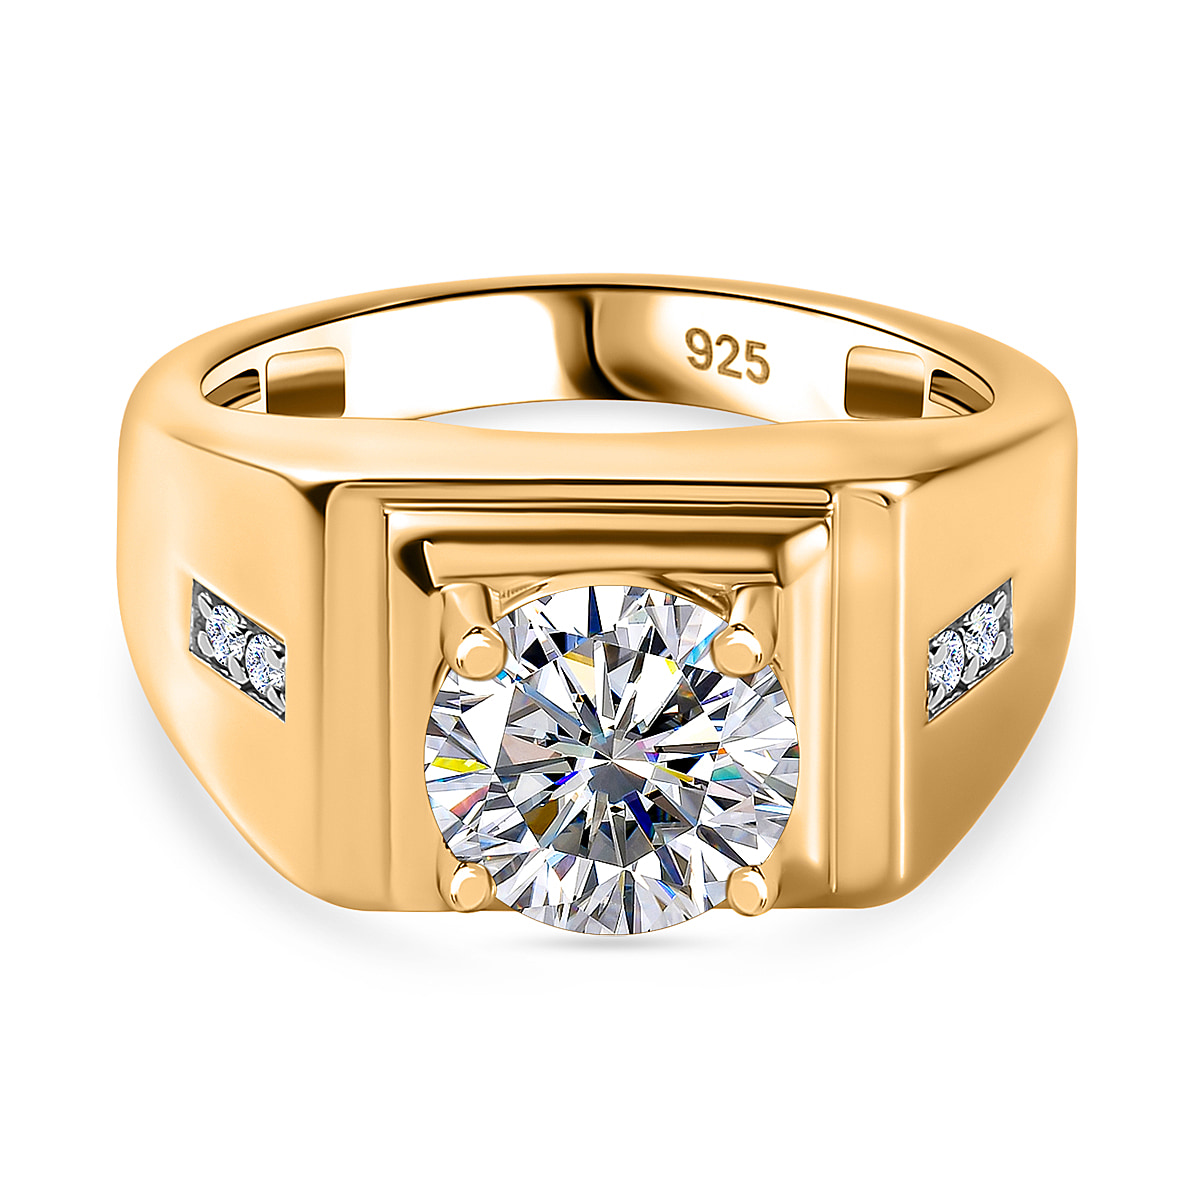 Moissanite Signet Ring in 18K Yellow Gold Vermeil Plated Sterling Silver 1.83 Ct, Silver Wt. 6.90 Gms